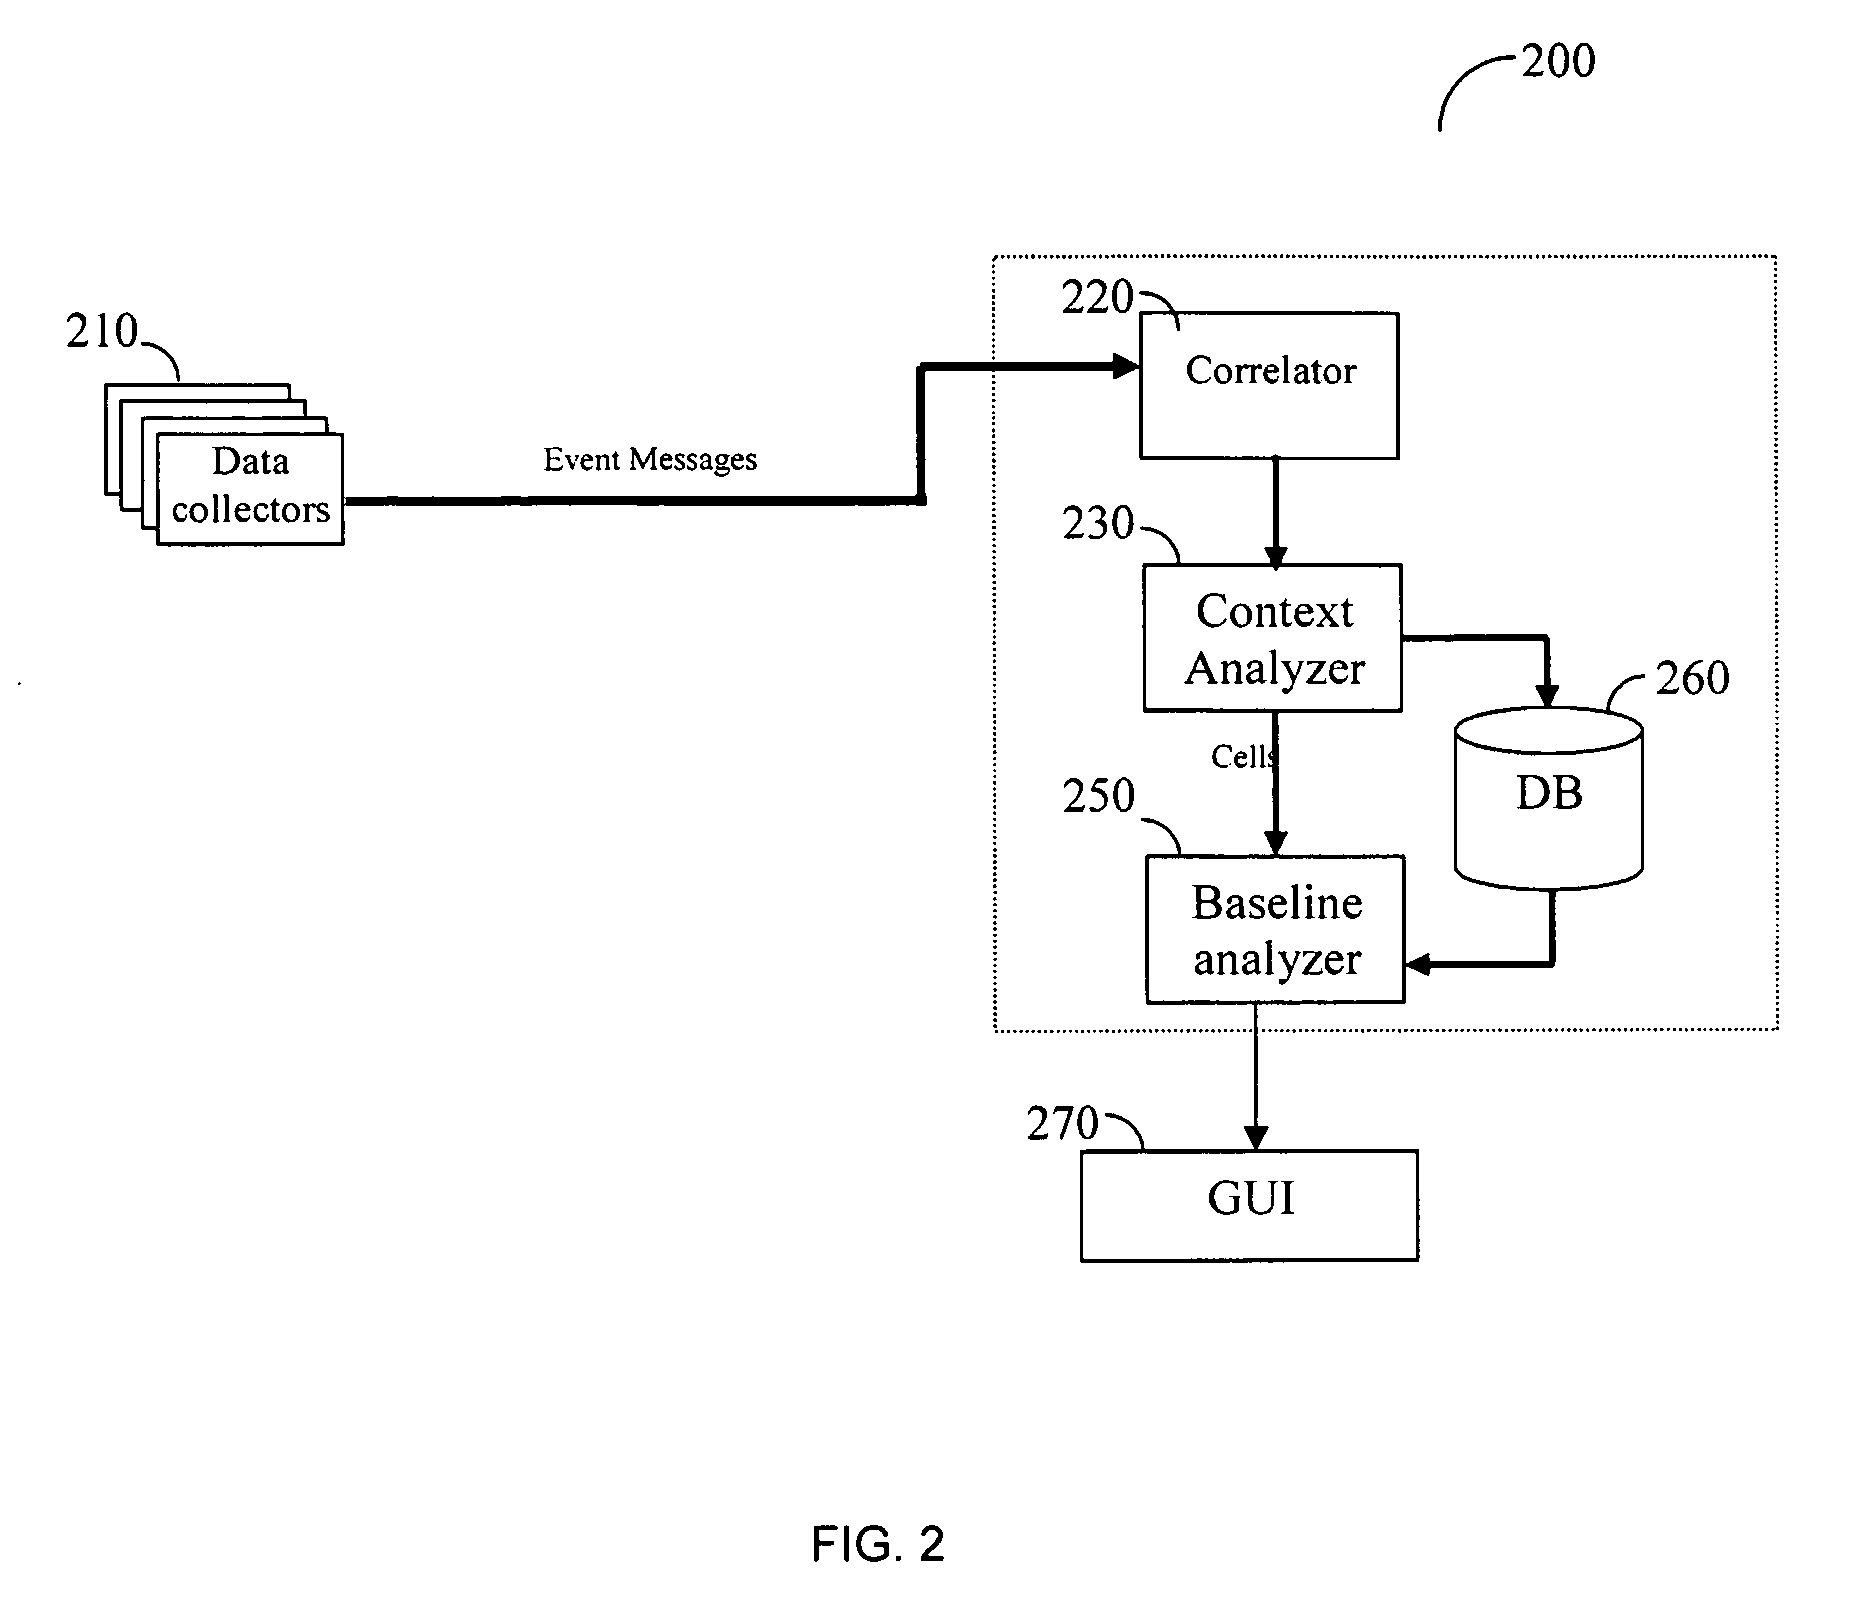 Method and apparatus for automatically discovering of application errors as a predictive metric for the functional health of enterprise applications